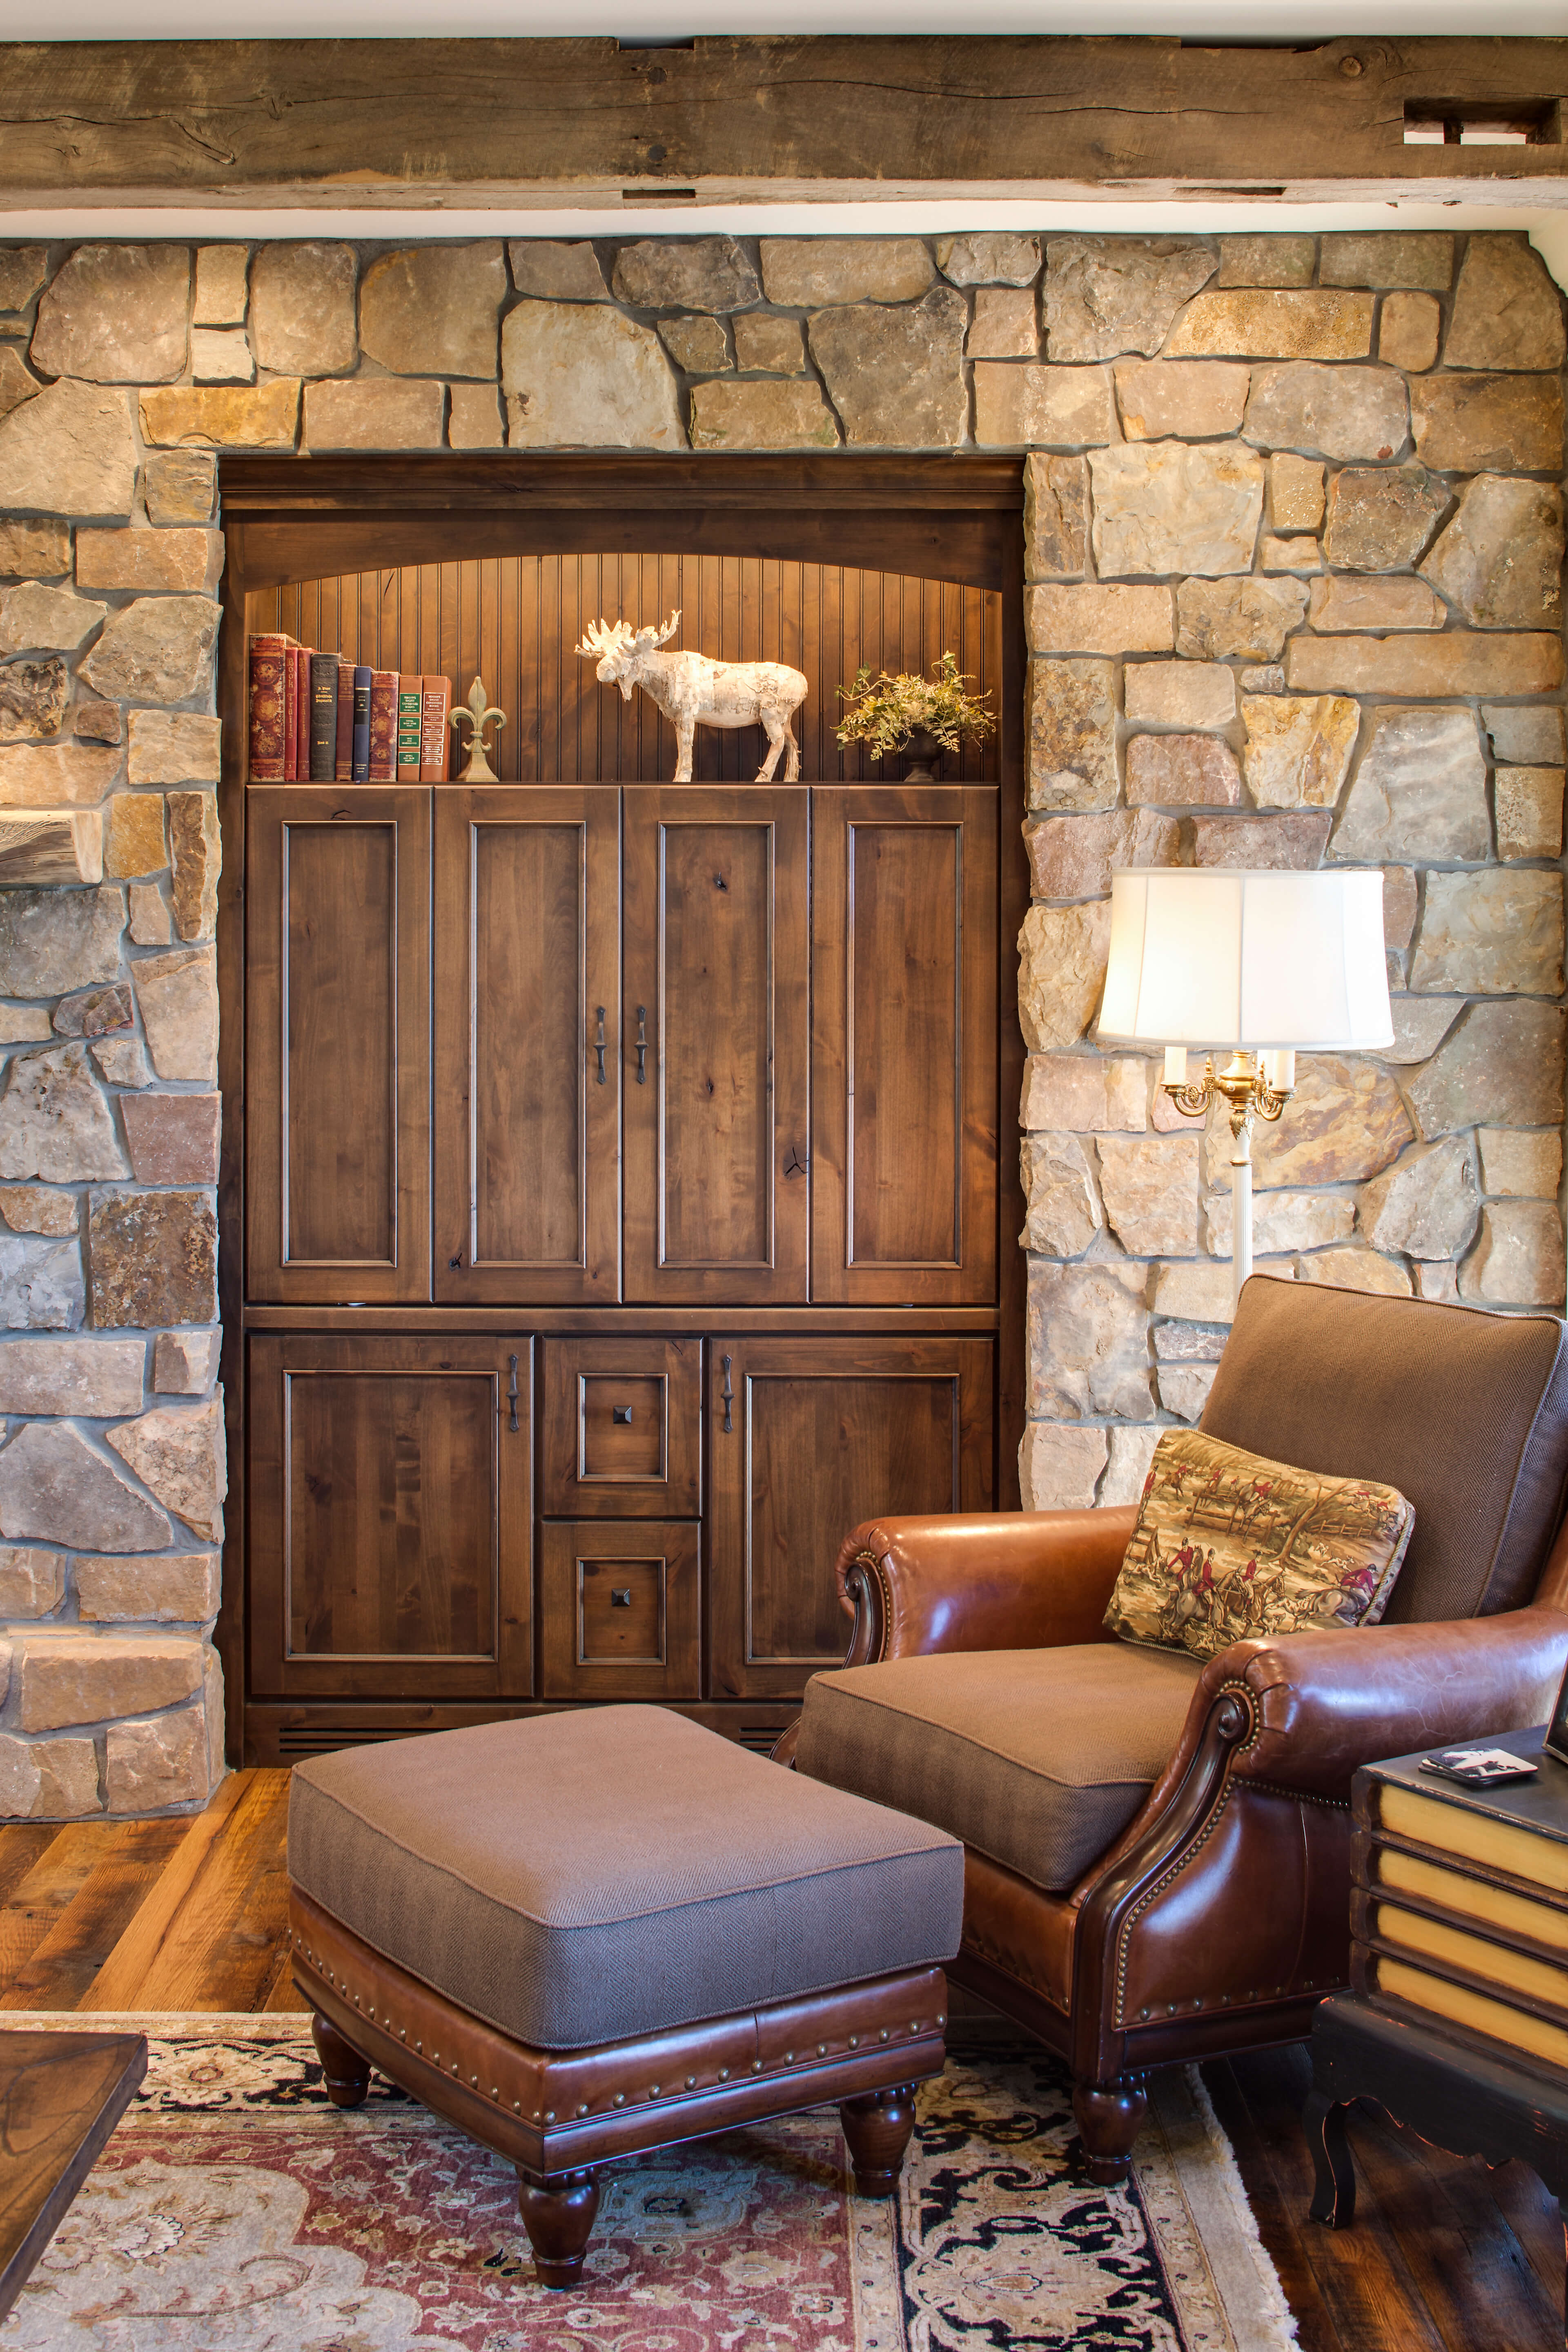 Rustic Knotty Alder Cabinets tucked into a stone wall for additional cabinet storage in a living room.